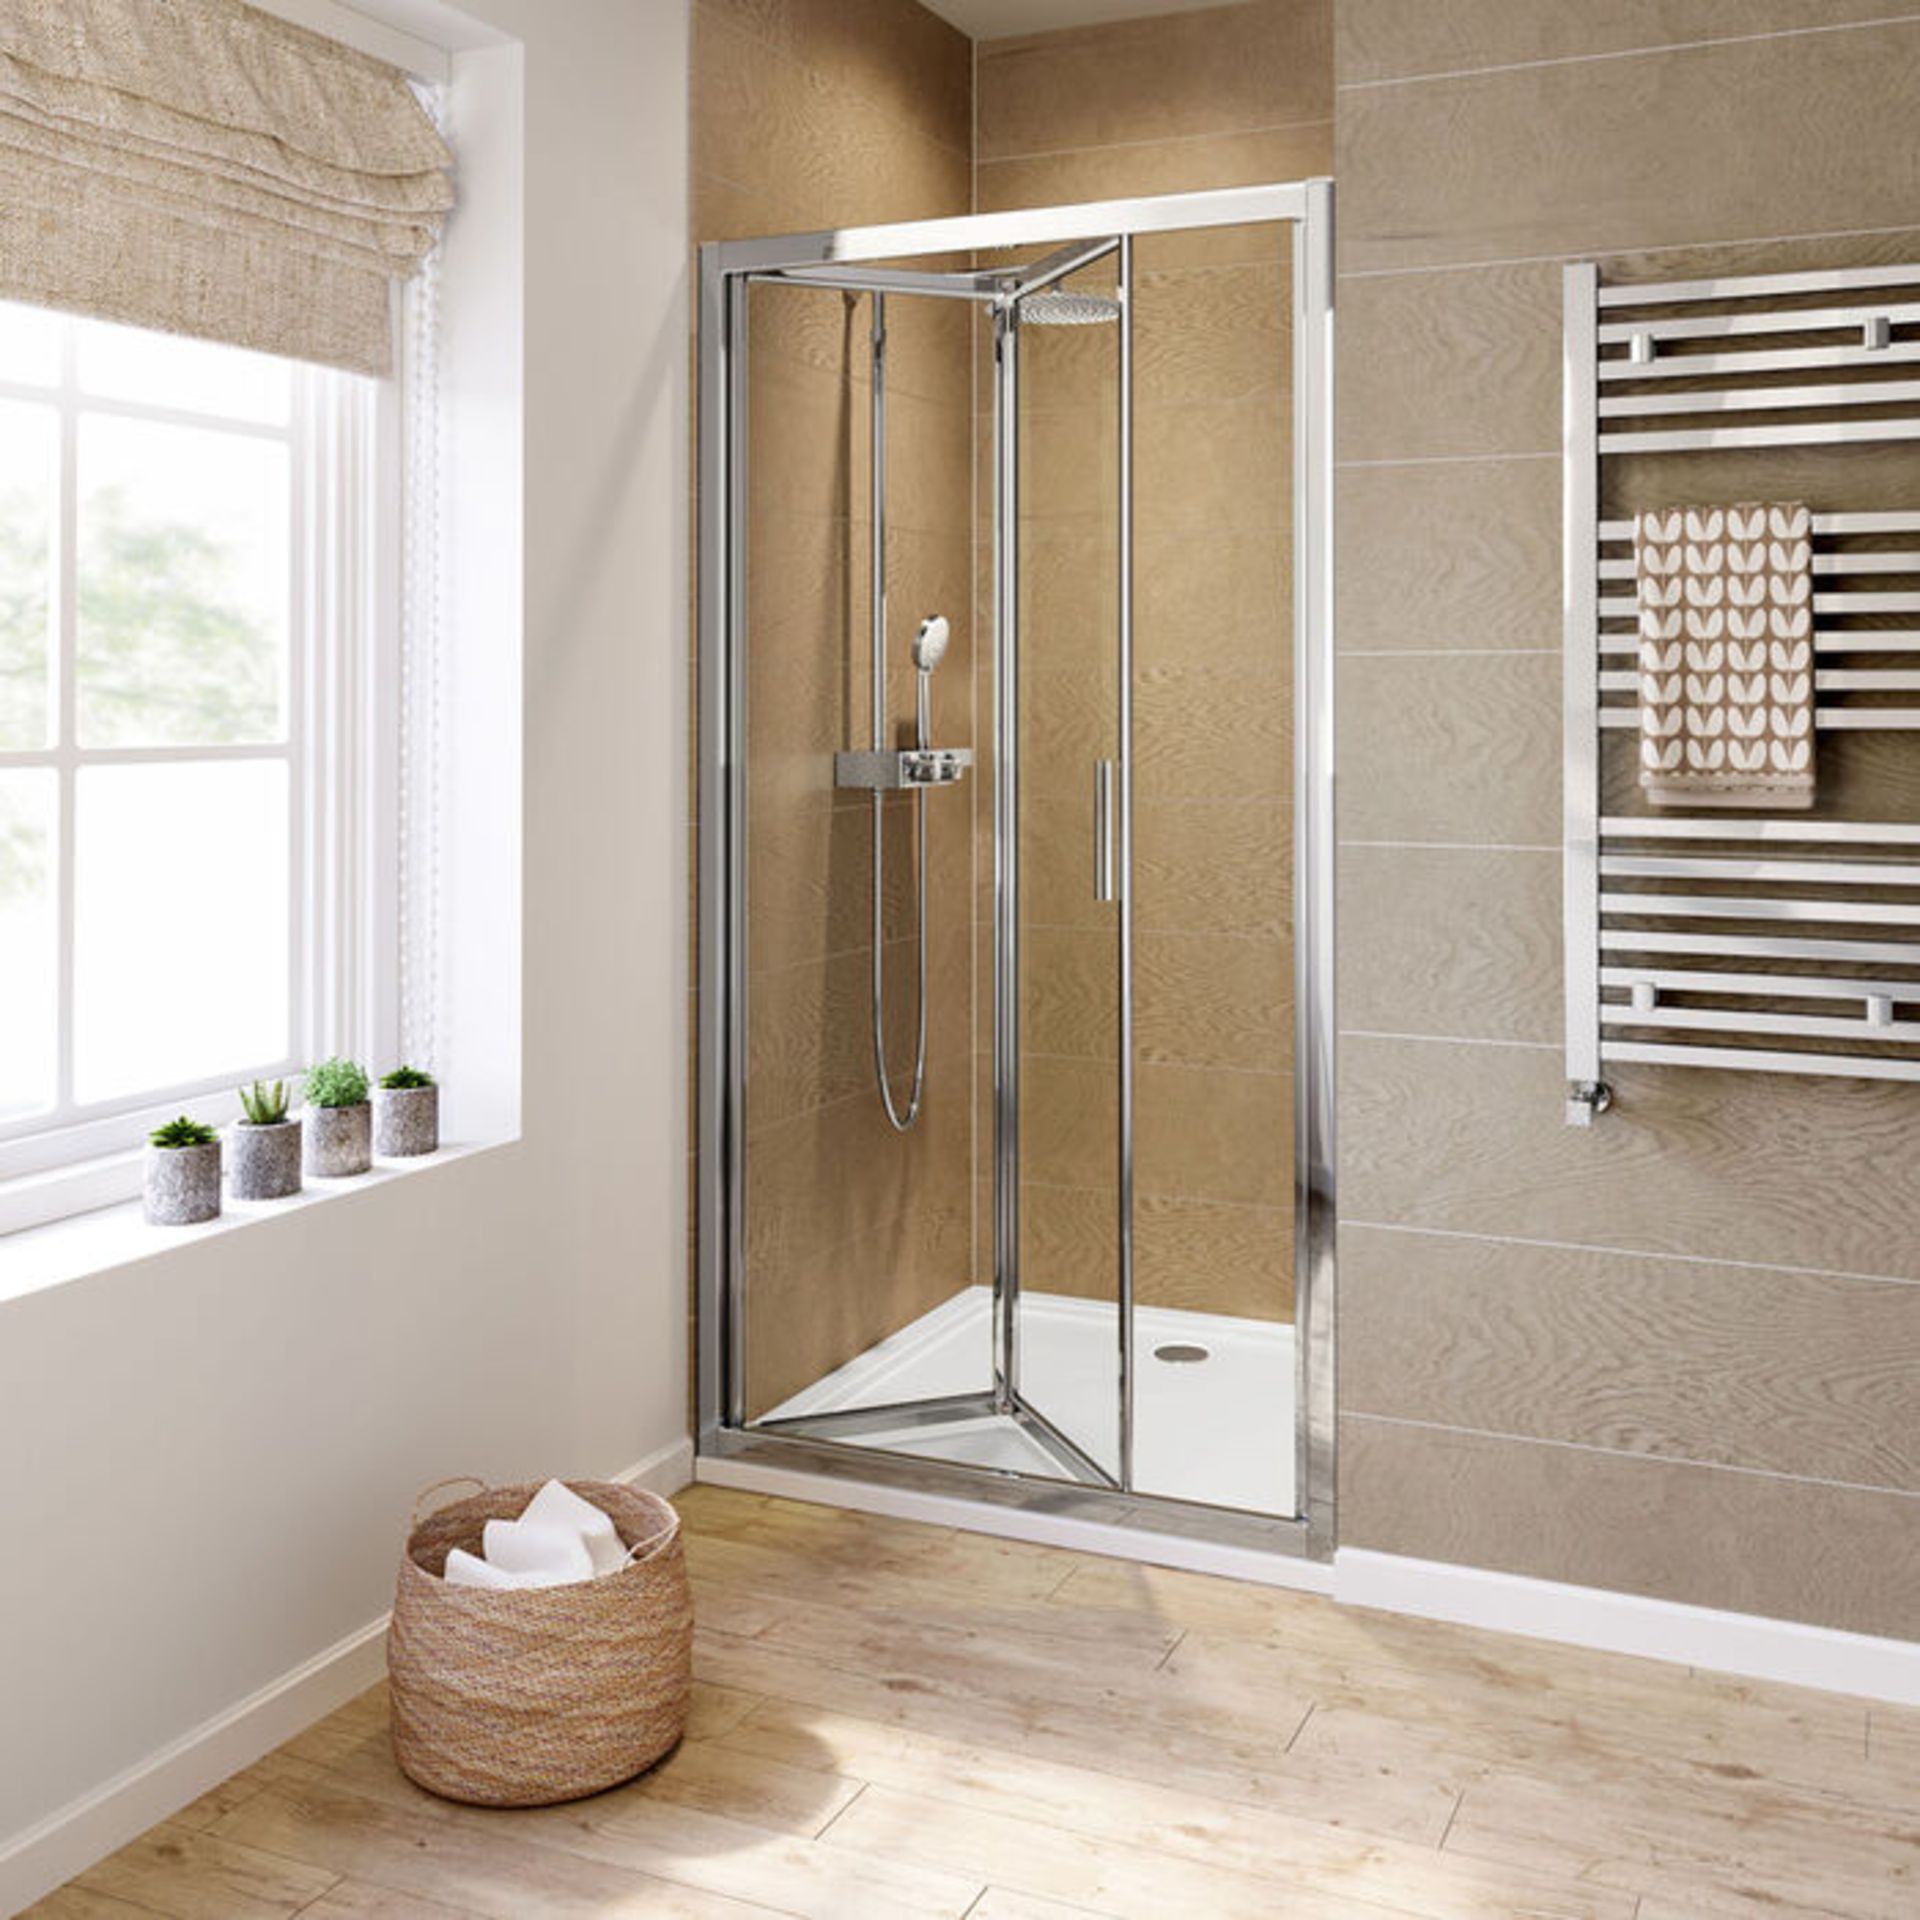 (JF30) 1000mm - 6mm - Elements EasyClean Bifold Shower Door. 6mm Safety Glass - Single-sided Ea... - Image 3 of 4